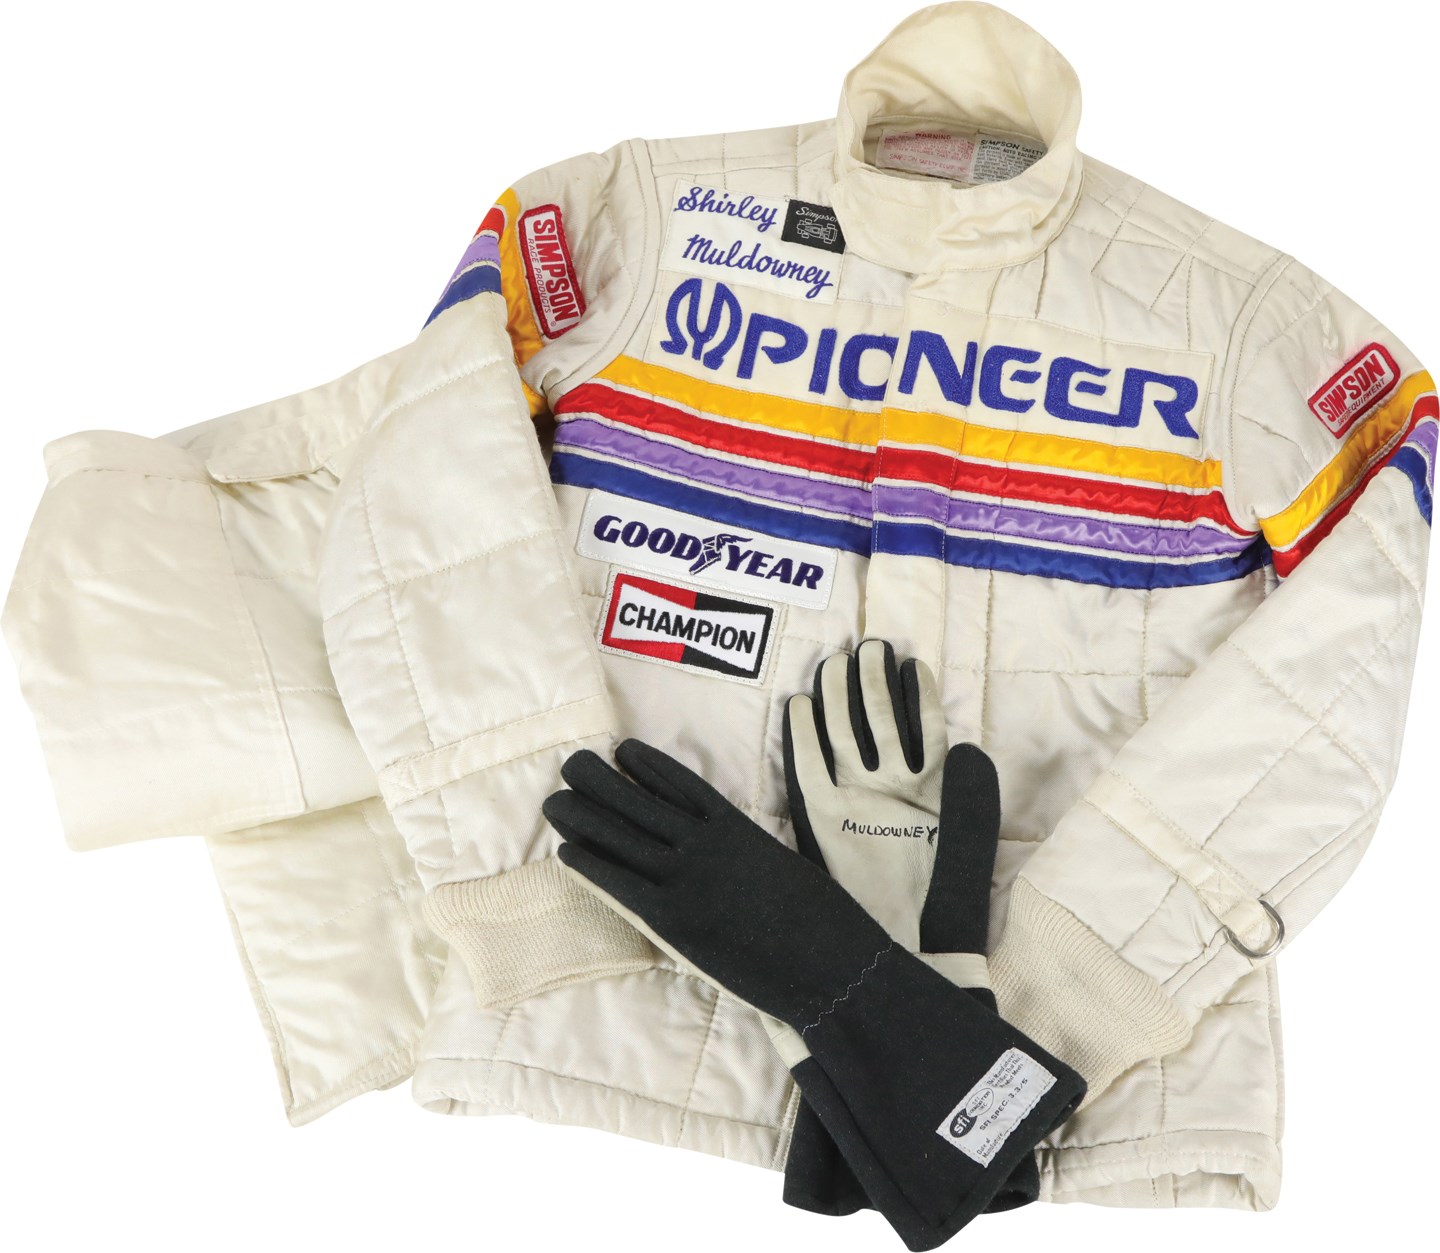 - 1980s Shirley Muldowney Race Worn Fire Suit and Gloves